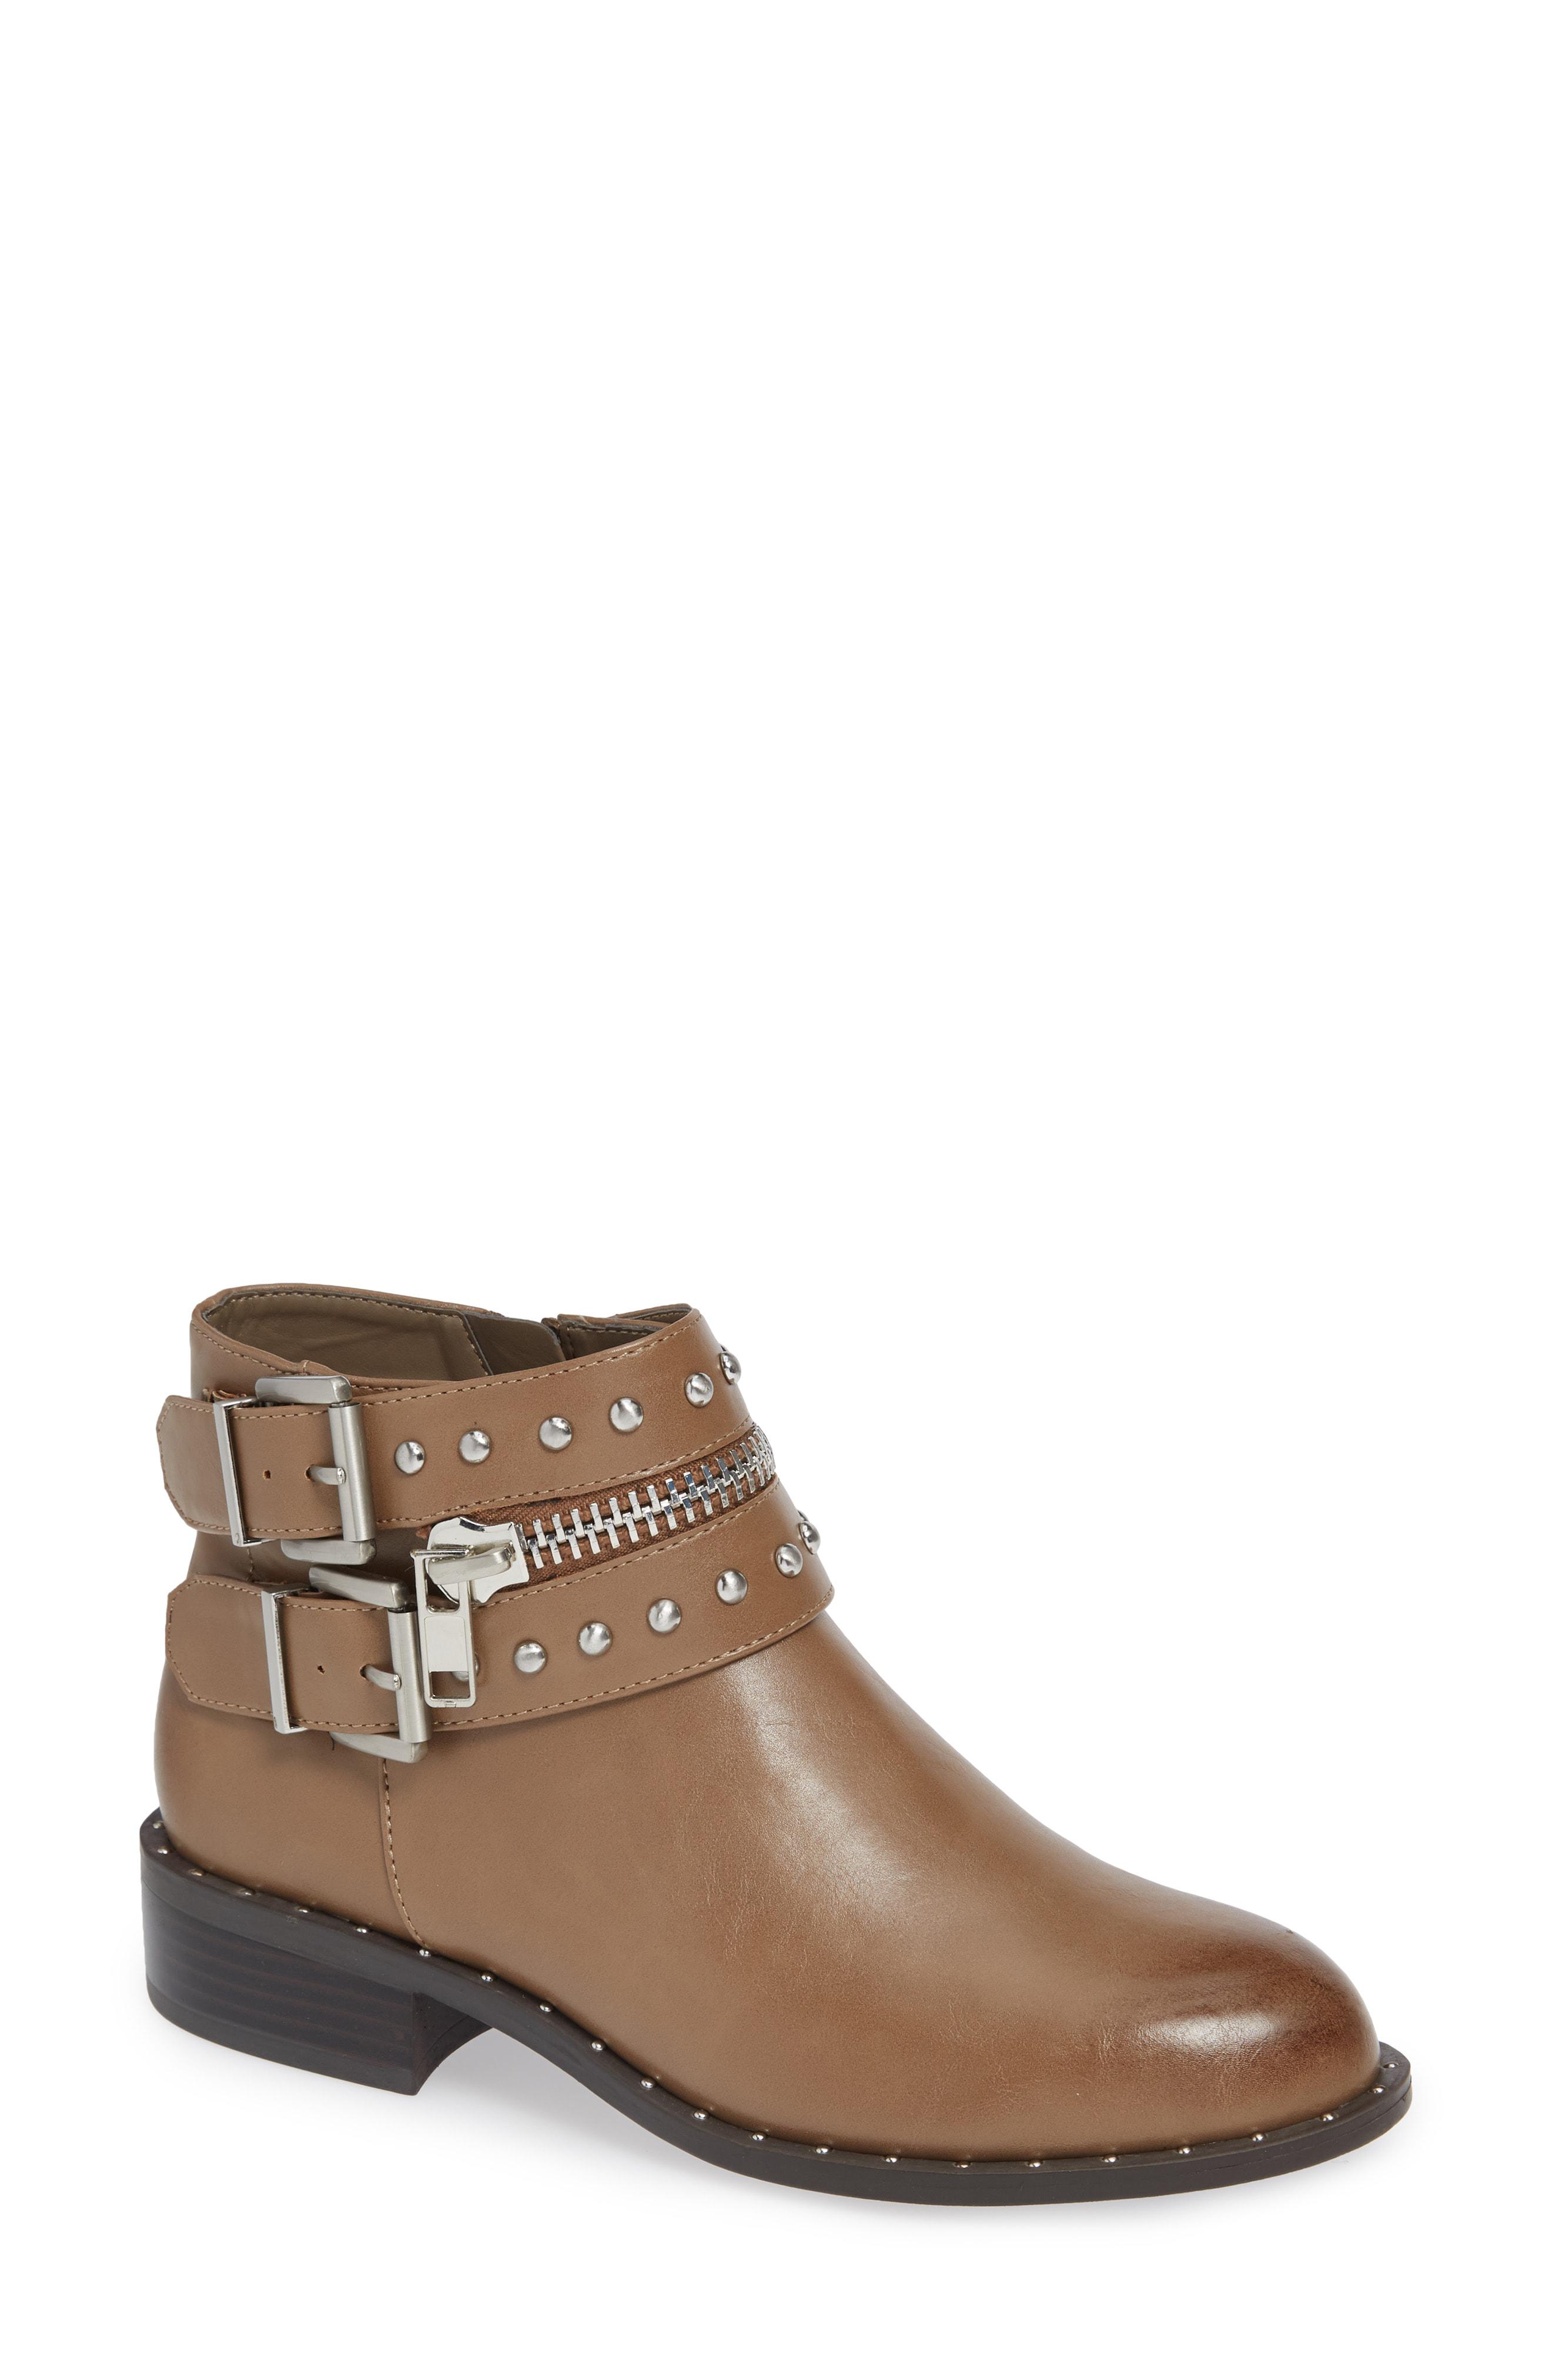 Charles David Thief Bootie in Taupe 